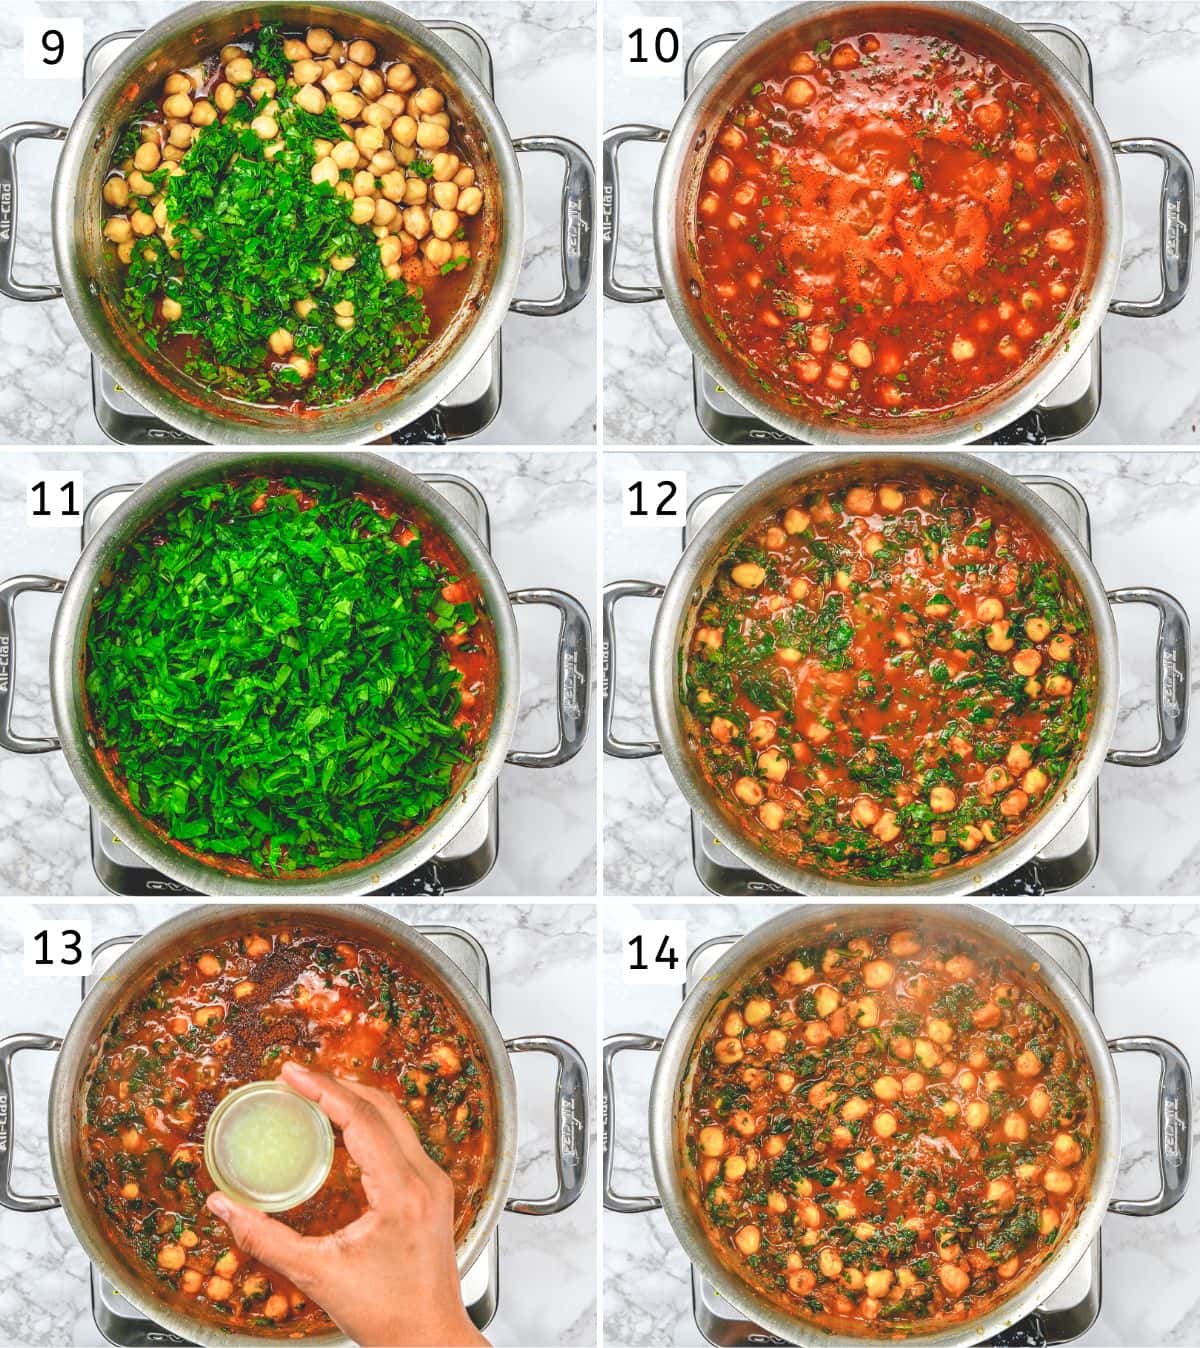 Collage of 6 images showing adding spinach, greens and simmering gravy.